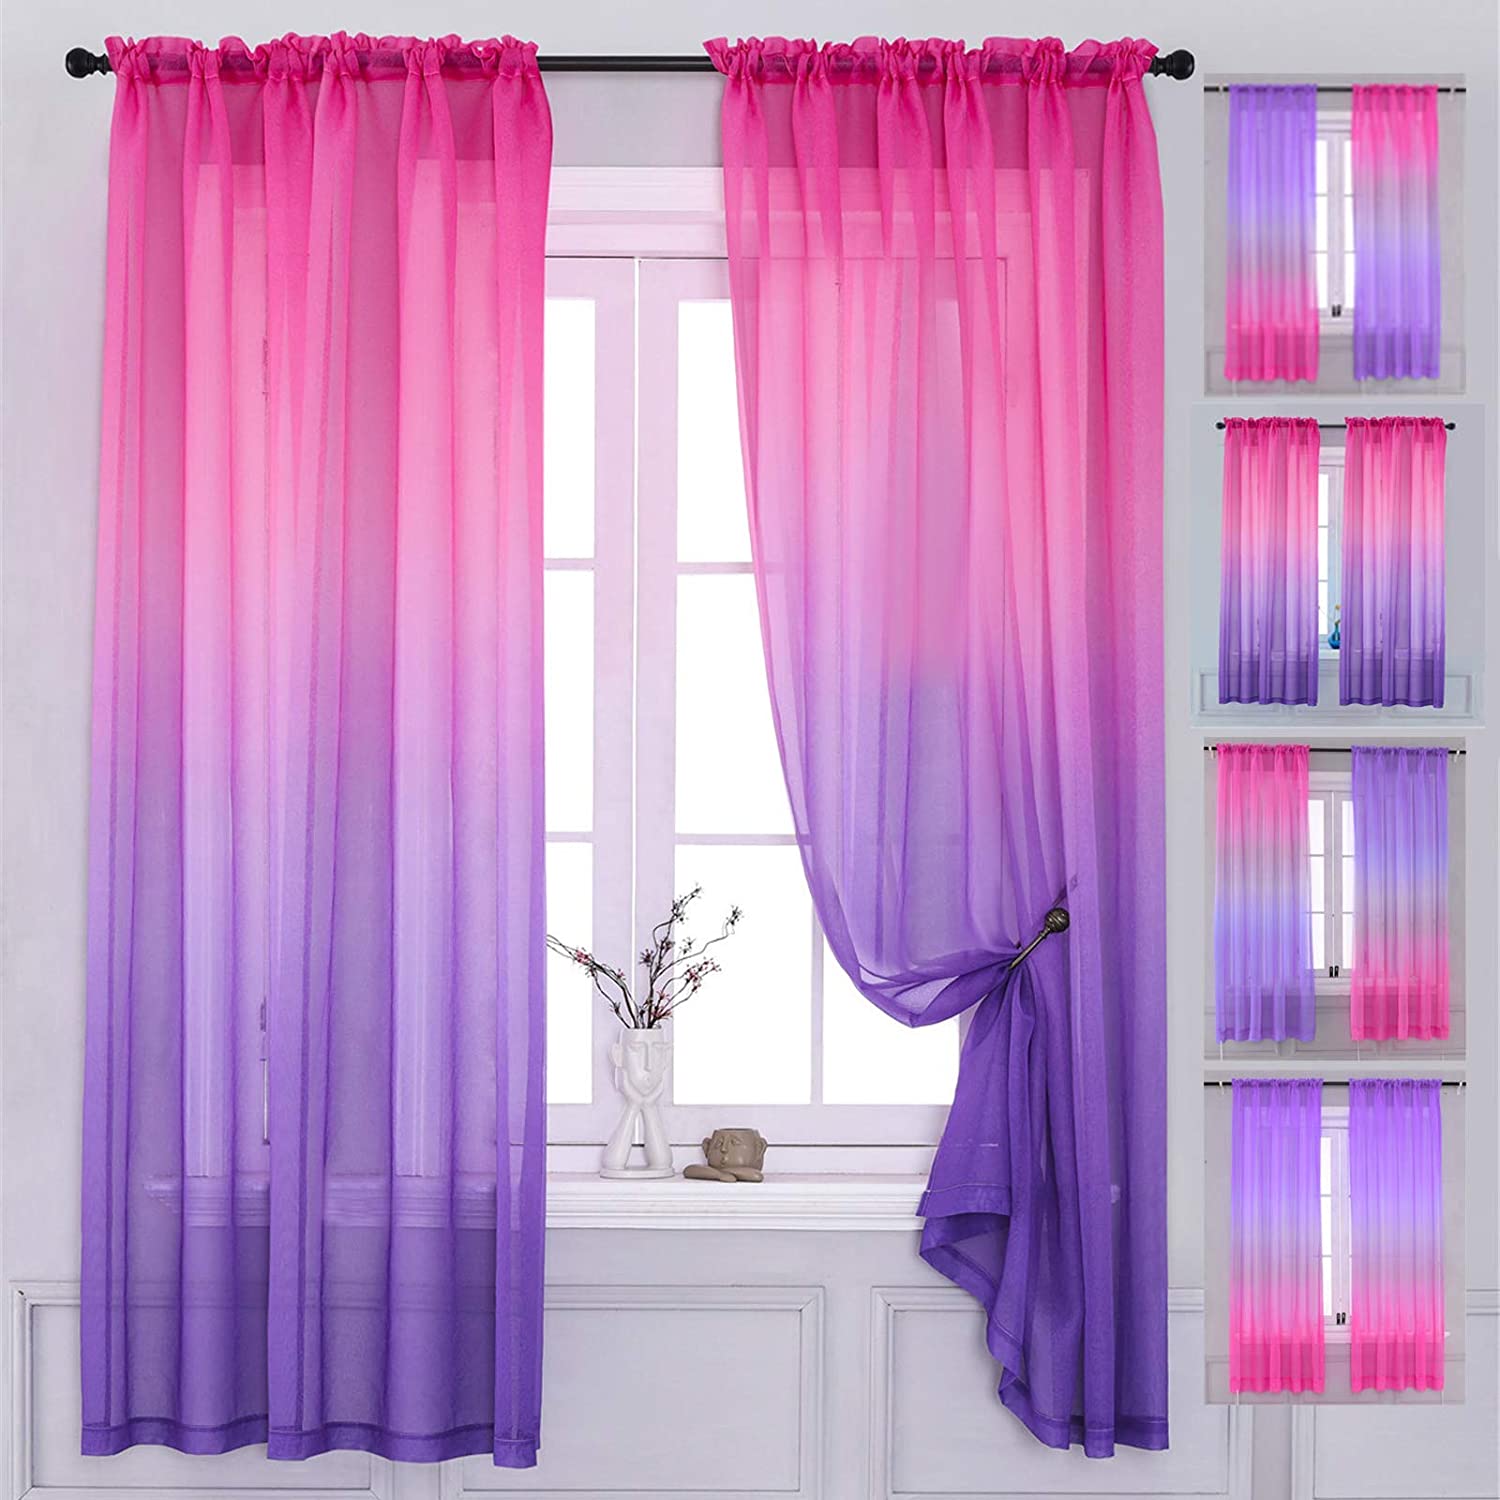 Bedroom Curtains 63 inch Length Sheer Curtain Pink Purple Ombre Curtains Rod Pocket Drapes for Girls 1 panel Pink Purple, 40″x63″